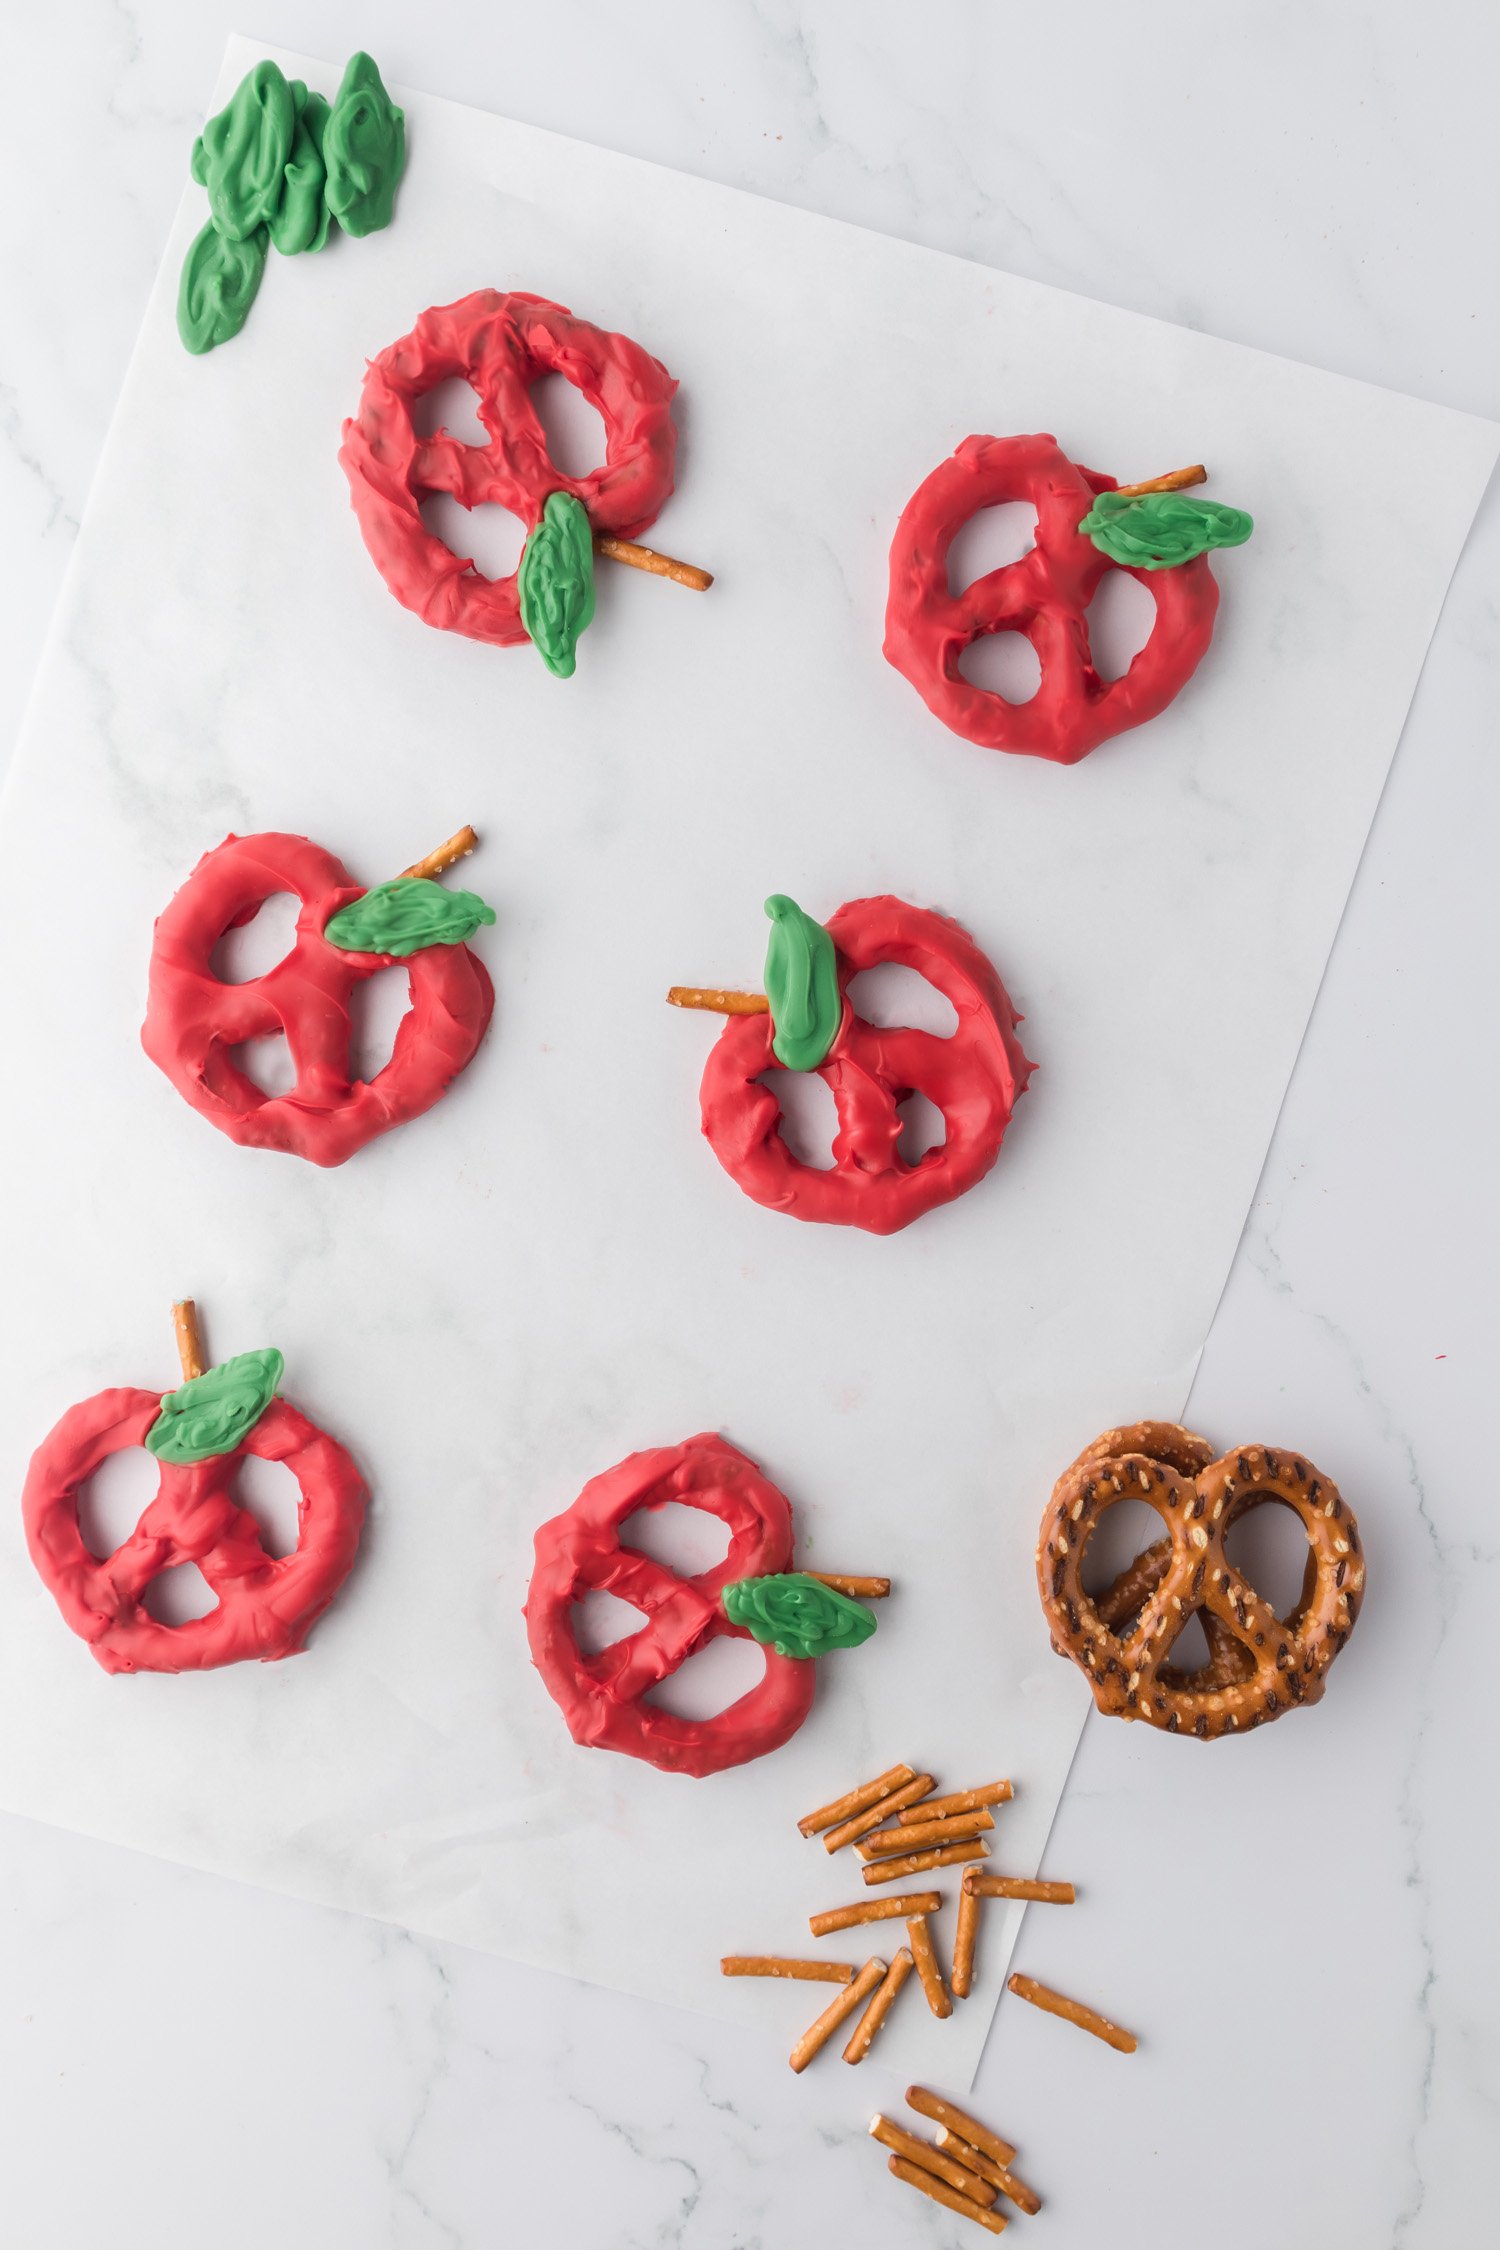 pretzels dipped to resemble apples